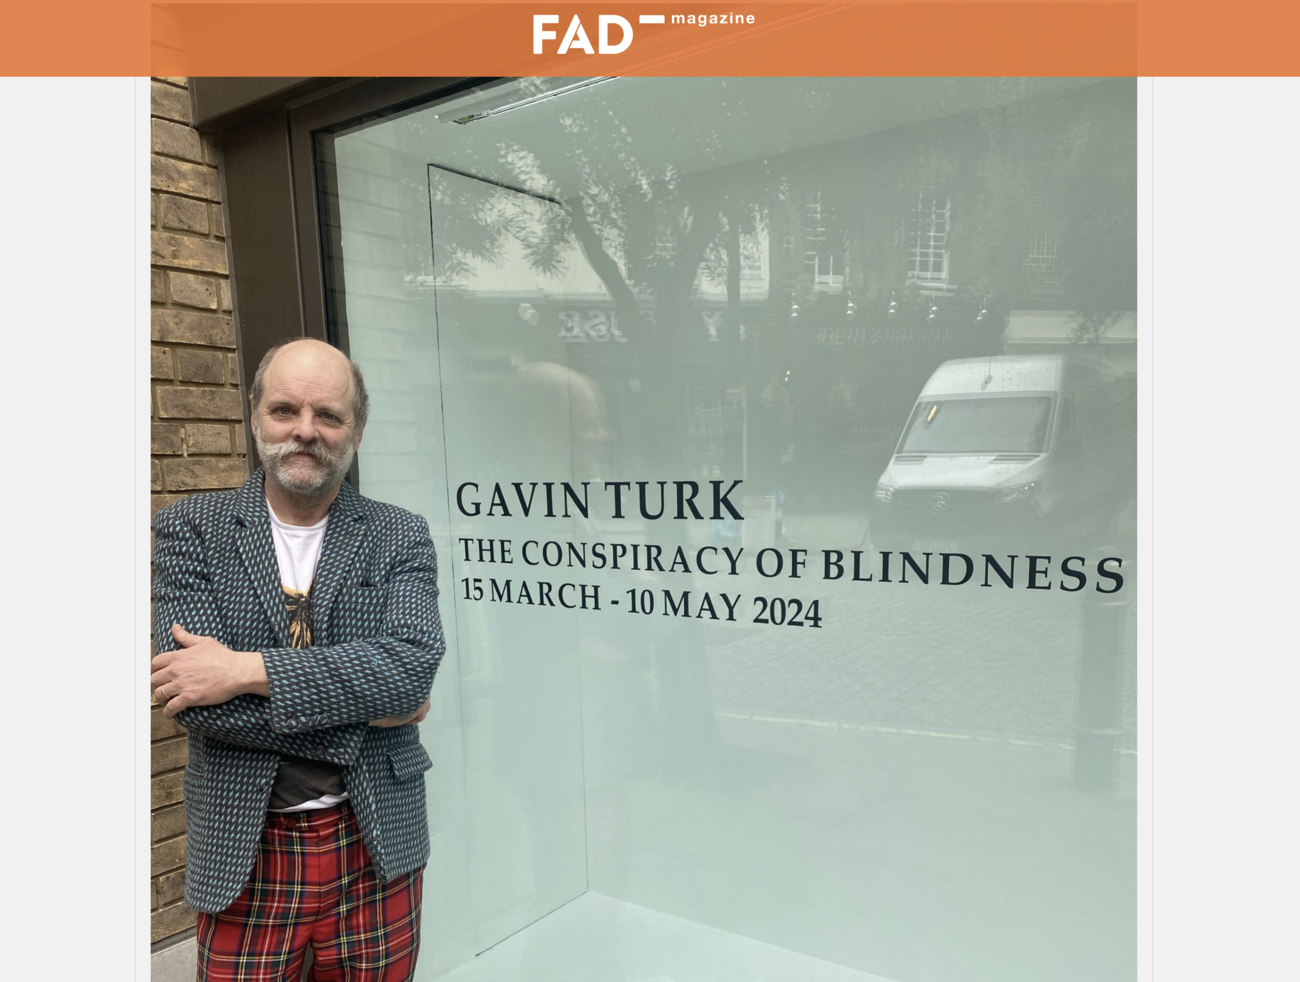 Image shows a screenshot from the Fad article of Gavin Turk in front of signage for his new exhibition